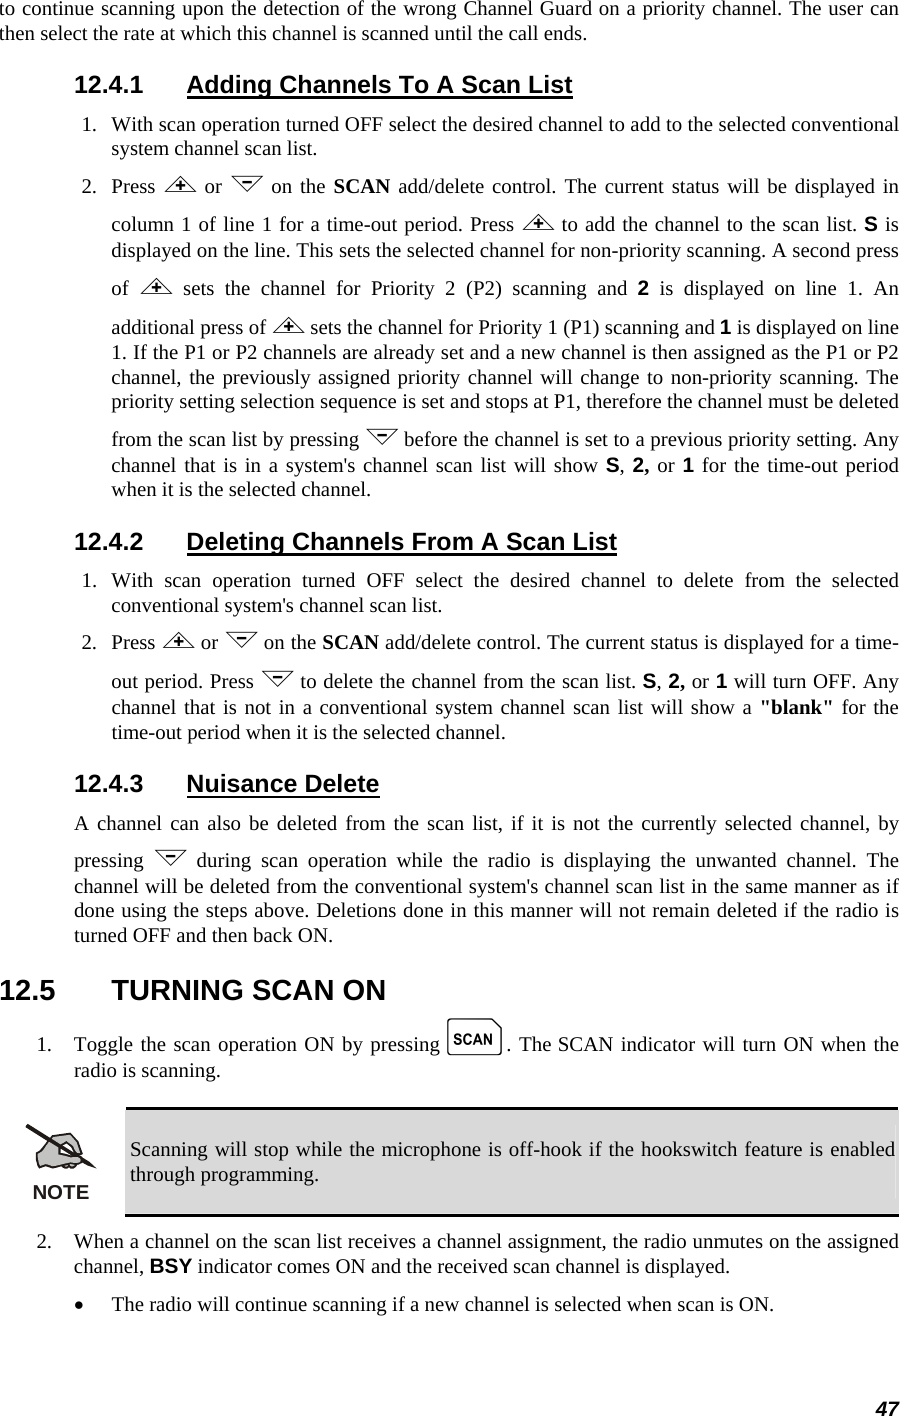 47 to continue scanning upon the detection of the wrong Channel Guard on a priority channel. The user can then select the rate at which this channel is scanned until the call ends. 12.4.1  Adding Channels To A Scan List 1.   With scan operation turned OFF select the desired channel to add to the selected conventional system channel scan list. 2.   Press  &lt; or &gt; on the SCAN add/delete control. The current status will be displayed in column 1 of line 1 for a time-out period. Press &lt; to add the channel to the scan list. S is displayed on the line. This sets the selected channel for non-priority scanning. A second press of  &lt; sets the channel for Priority 2 (P2) scanning and 2 is displayed on line 1. An additional press of &lt; sets the channel for Priority 1 (P1) scanning and 1 is displayed on line 1. If the P1 or P2 channels are already set and a new channel is then assigned as the P1 or P2 channel, the previously assigned priority channel will change to non-priority scanning. The priority setting selection sequence is set and stops at P1, therefore the channel must be deleted from the scan list by pressing &gt; before the channel is set to a previous priority setting. Any channel that is in a system&apos;s channel scan list will show S, 2, or 1 for the time-out period when it is the selected channel. 12.4.2  Deleting Channels From A Scan List 1.  With scan operation turned OFF select the desired channel to delete from the selected conventional system&apos;s channel scan list. 2.   Press &lt; or &gt; on the SCAN add/delete control. The current status is displayed for a time-out period. Press &gt; to delete the channel from the scan list. S, 2, or 1 will turn OFF. Any channel that is not in a conventional system channel scan list will show a &quot;blank&quot; for the time-out period when it is the selected channel. 12.4.3 Nuisance Delete A channel can also be deleted from the scan list, if it is not the currently selected channel, by pressing  &gt; during scan operation while the radio is displaying the unwanted channel. The channel will be deleted from the conventional system&apos;s channel scan list in the same manner as if done using the steps above. Deletions done in this manner will not remain deleted if the radio is turned OFF and then back ON. 12.5  TURNING SCAN ON 1.   Toggle the scan operation ON by pressing k. The SCAN indicator will turn ON when the radio is scanning.  NOTE Scanning will stop while the microphone is off-hook if the hookswitch feature is enabled through programming. 2.   When a channel on the scan list receives a channel assignment, the radio unmutes on the assigned channel, BSY indicator comes ON and the received scan channel is displayed. • The radio will continue scanning if a new channel is selected when scan is ON. 